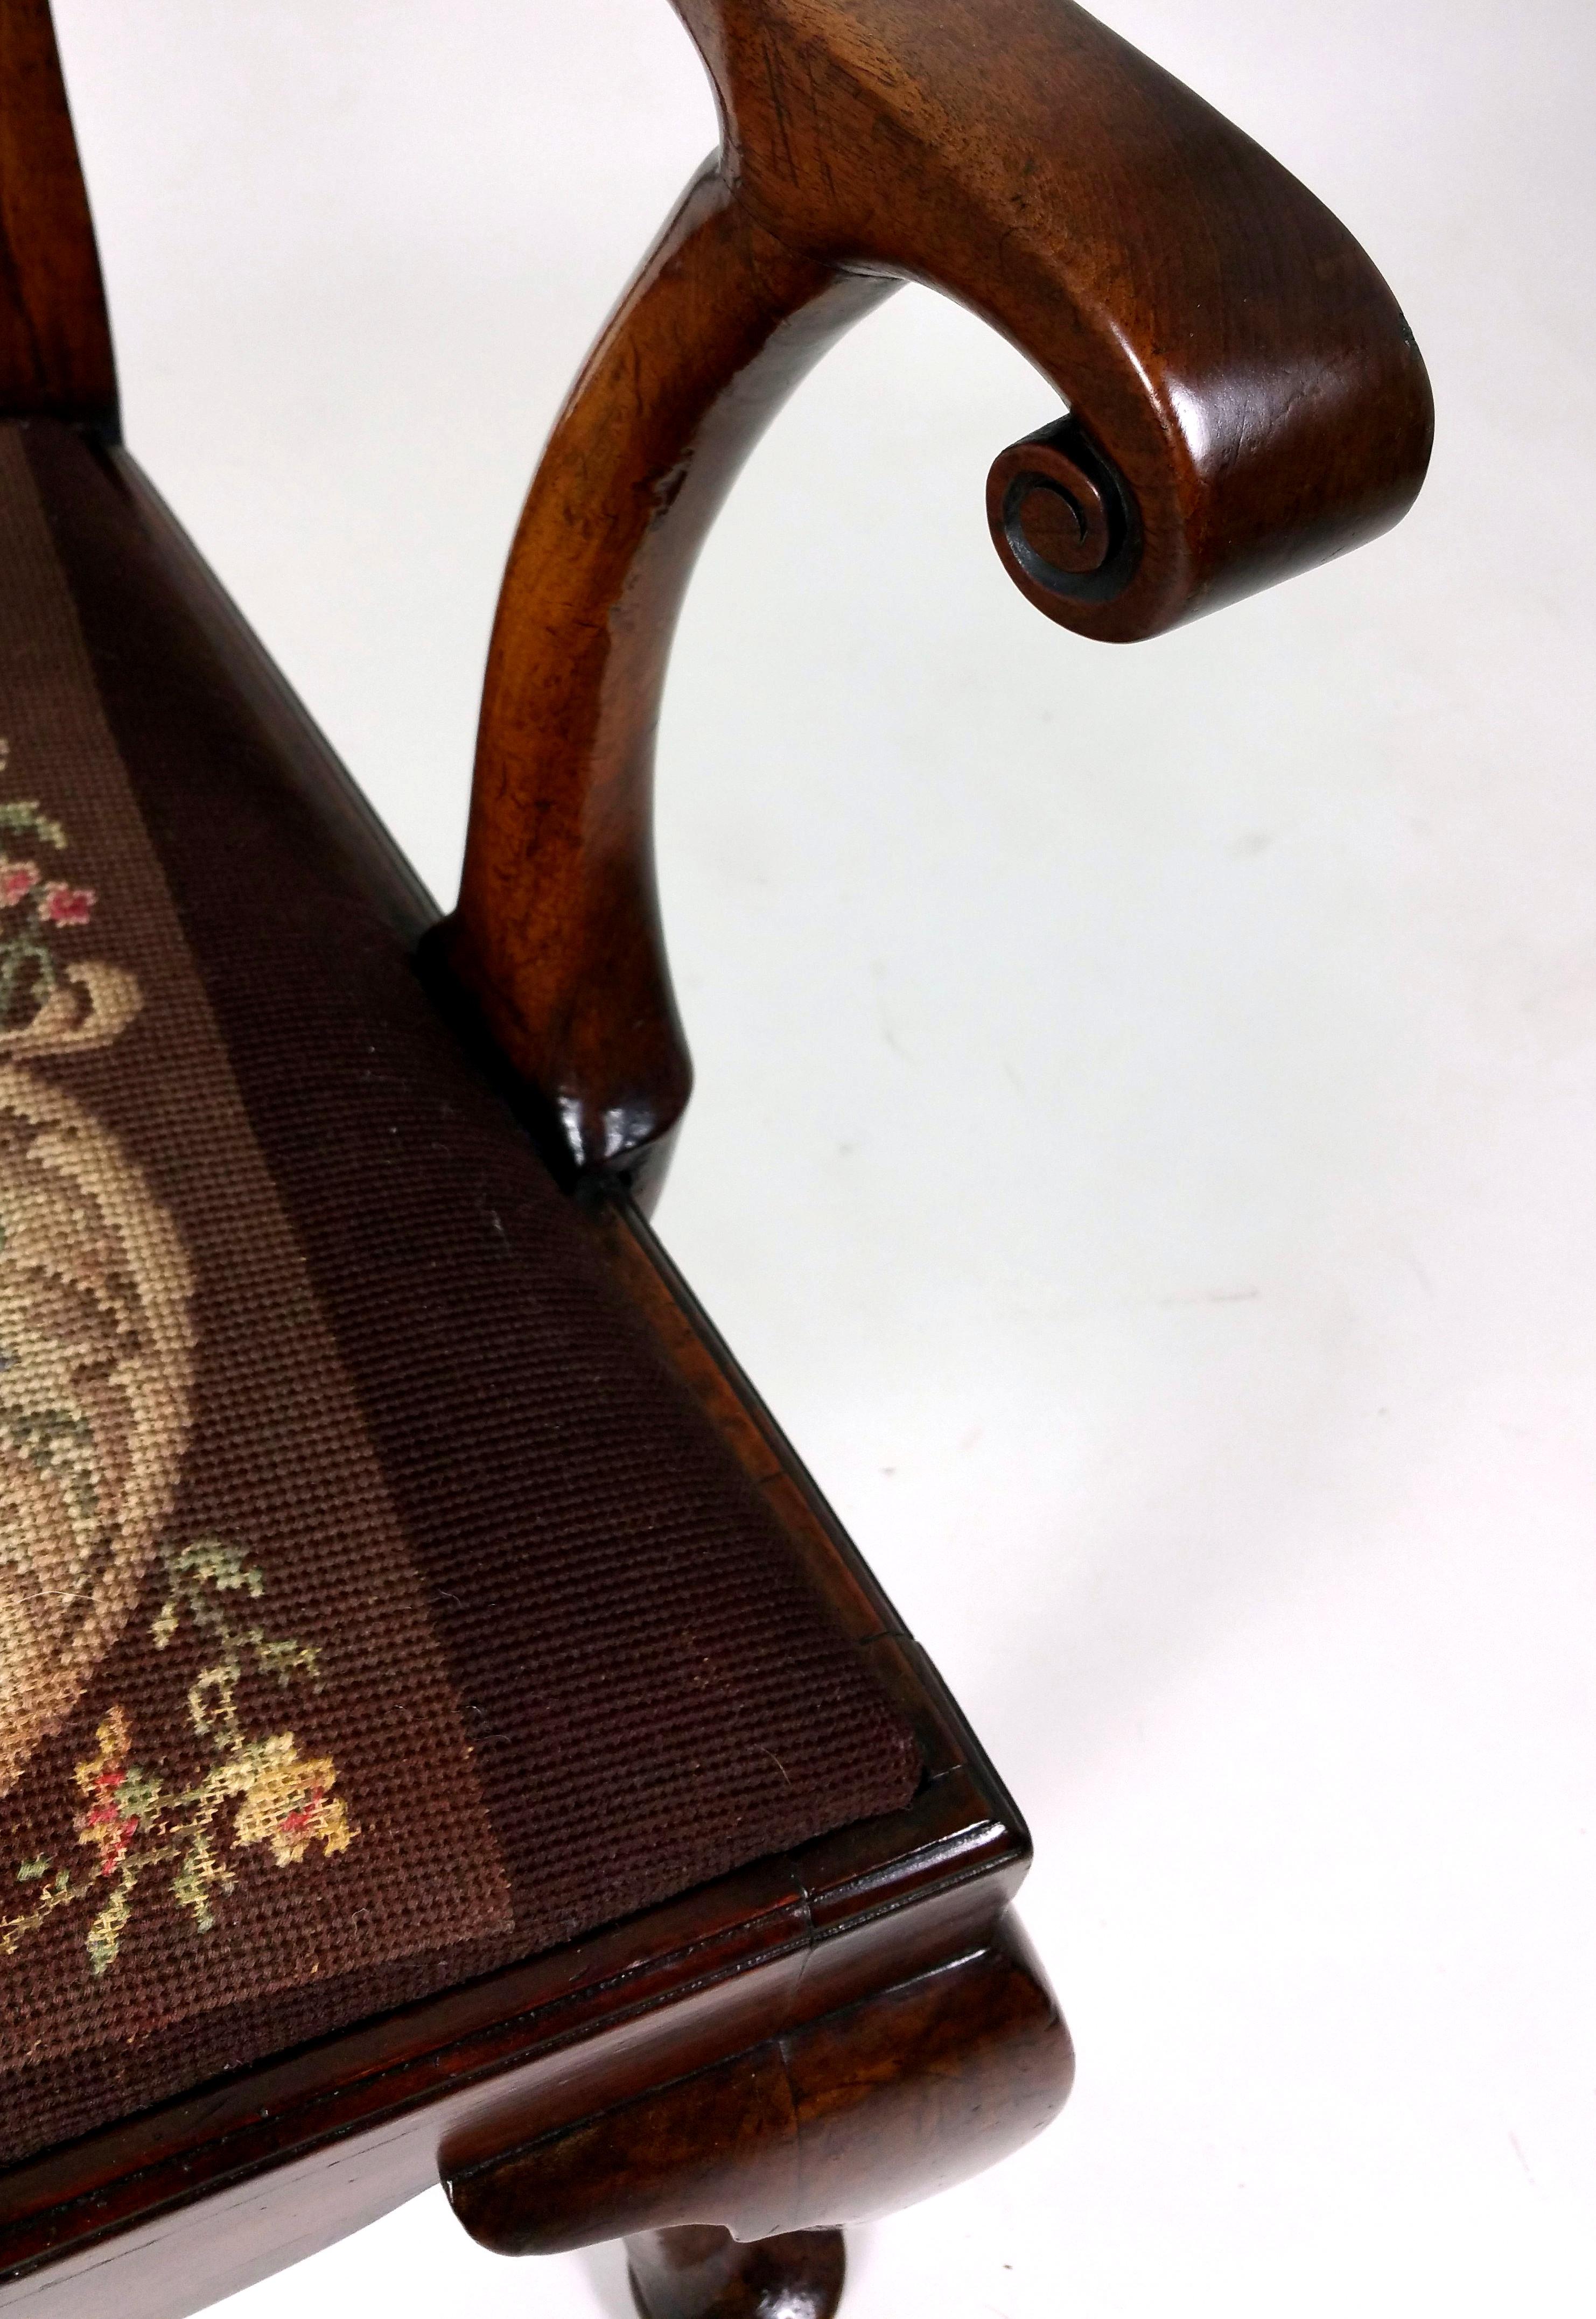 This very handsome and fine quality 18th century solid walnut splat back elbow chair features front cabriole and swept back legs with shaped arm supports. The chair has a drop in seat with an old, but not original, tapestry cover in very good